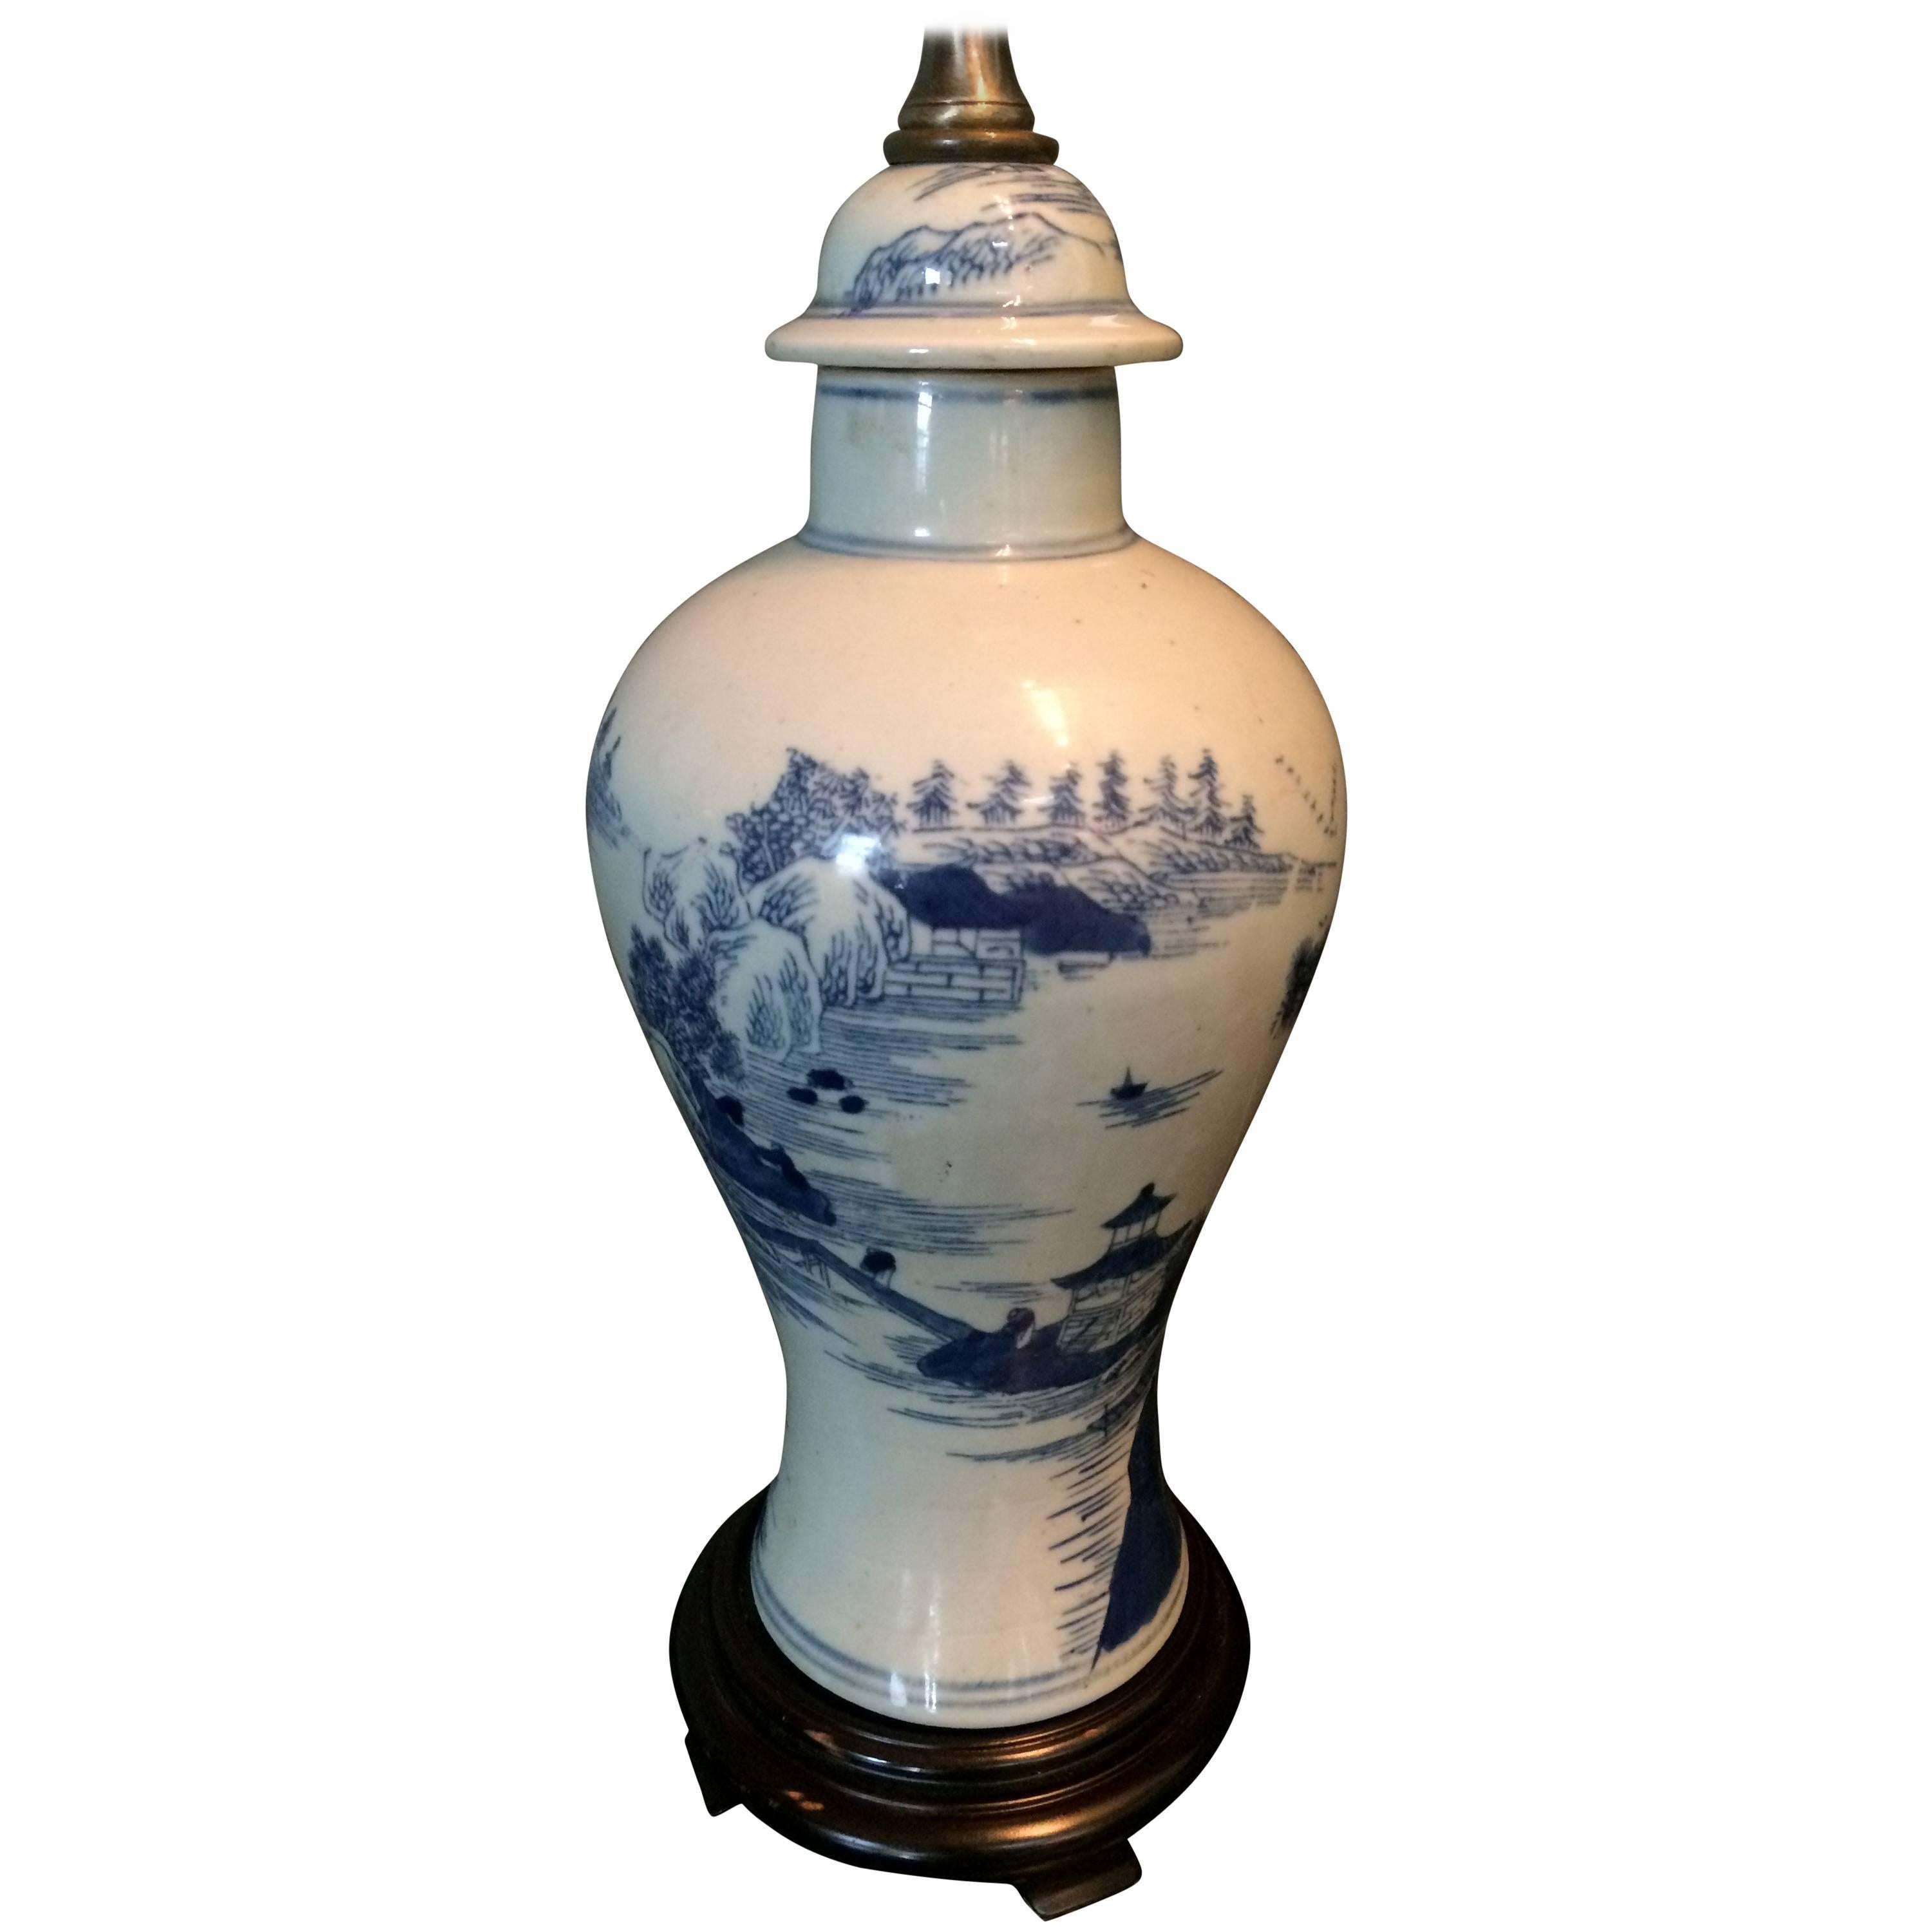 Charming Single Blue and White Chinese Porcelain Jar, Mounted as Lamp